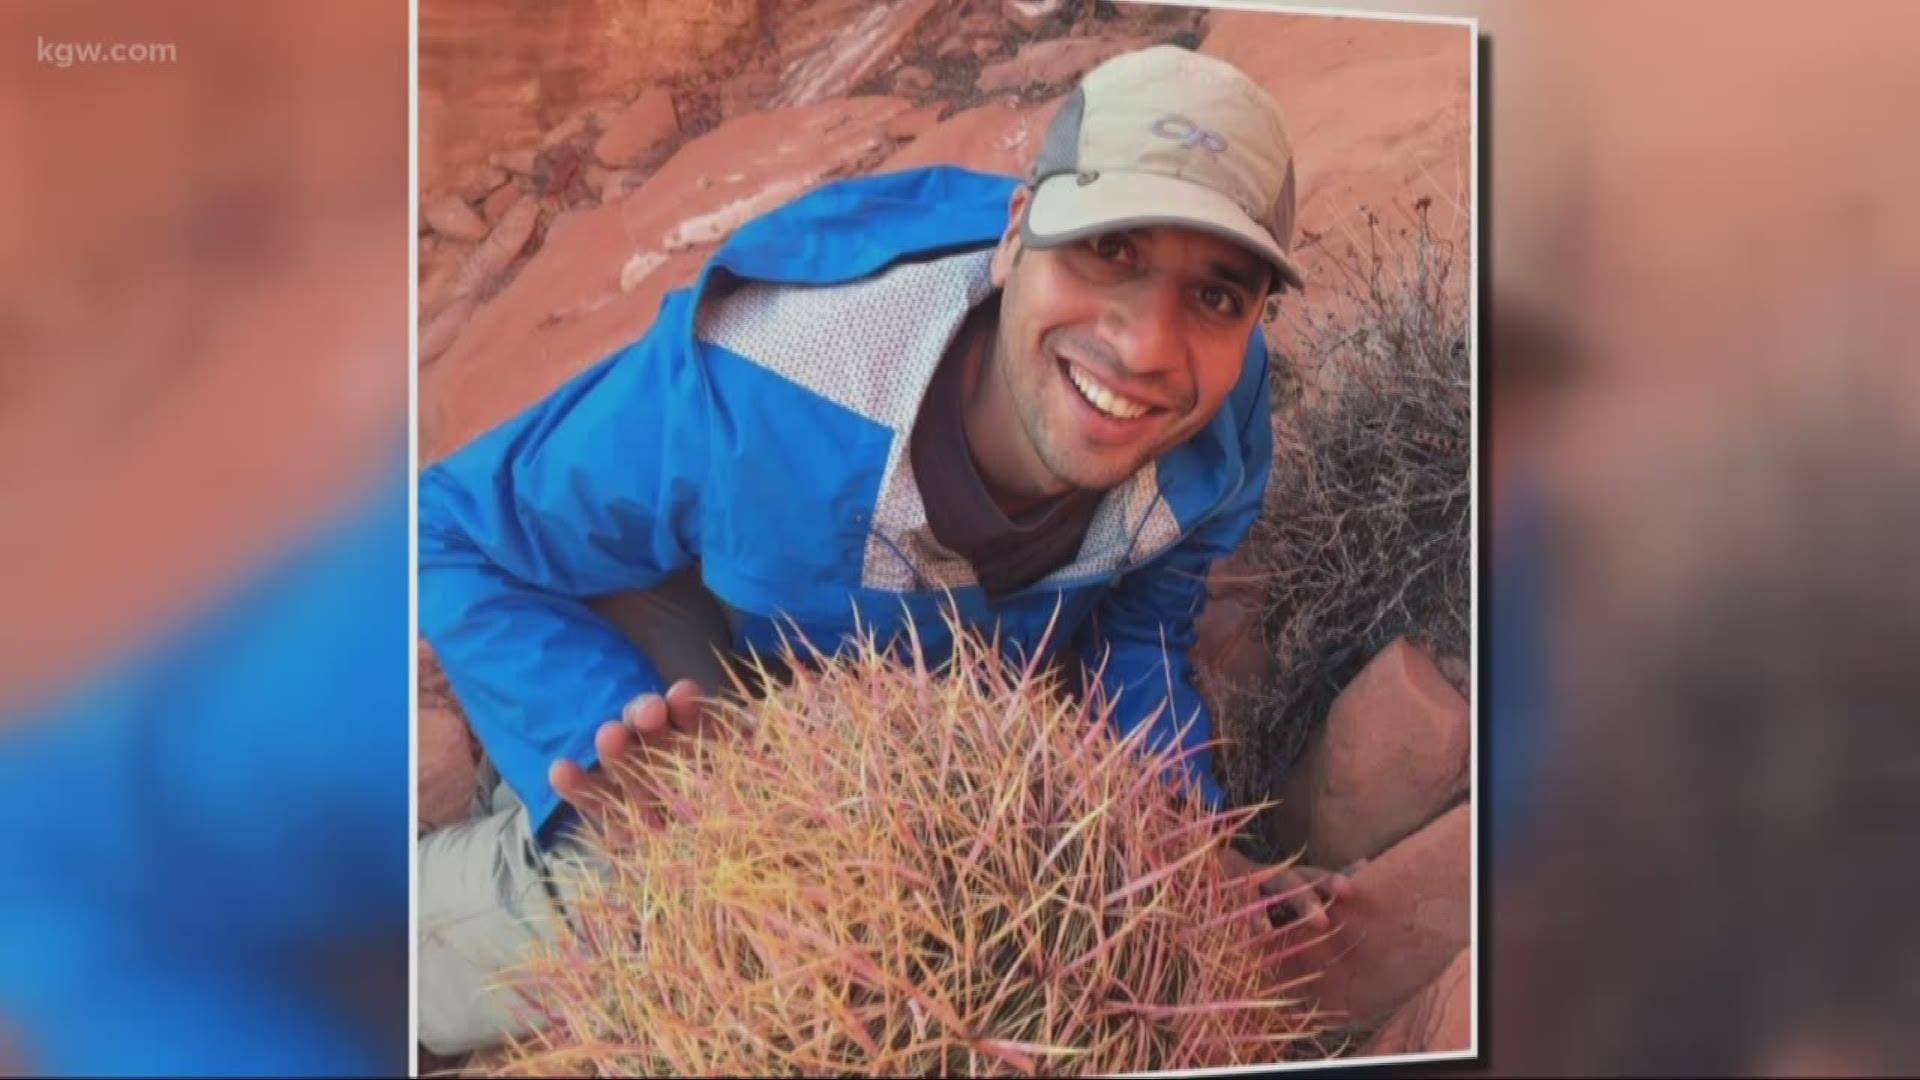 The Oregon hiking and climbing community is mourning the death of one of their own. A Hillsboro man named Chaitanya Sathe died Saturday, when he fell at Smith Rock State Park.